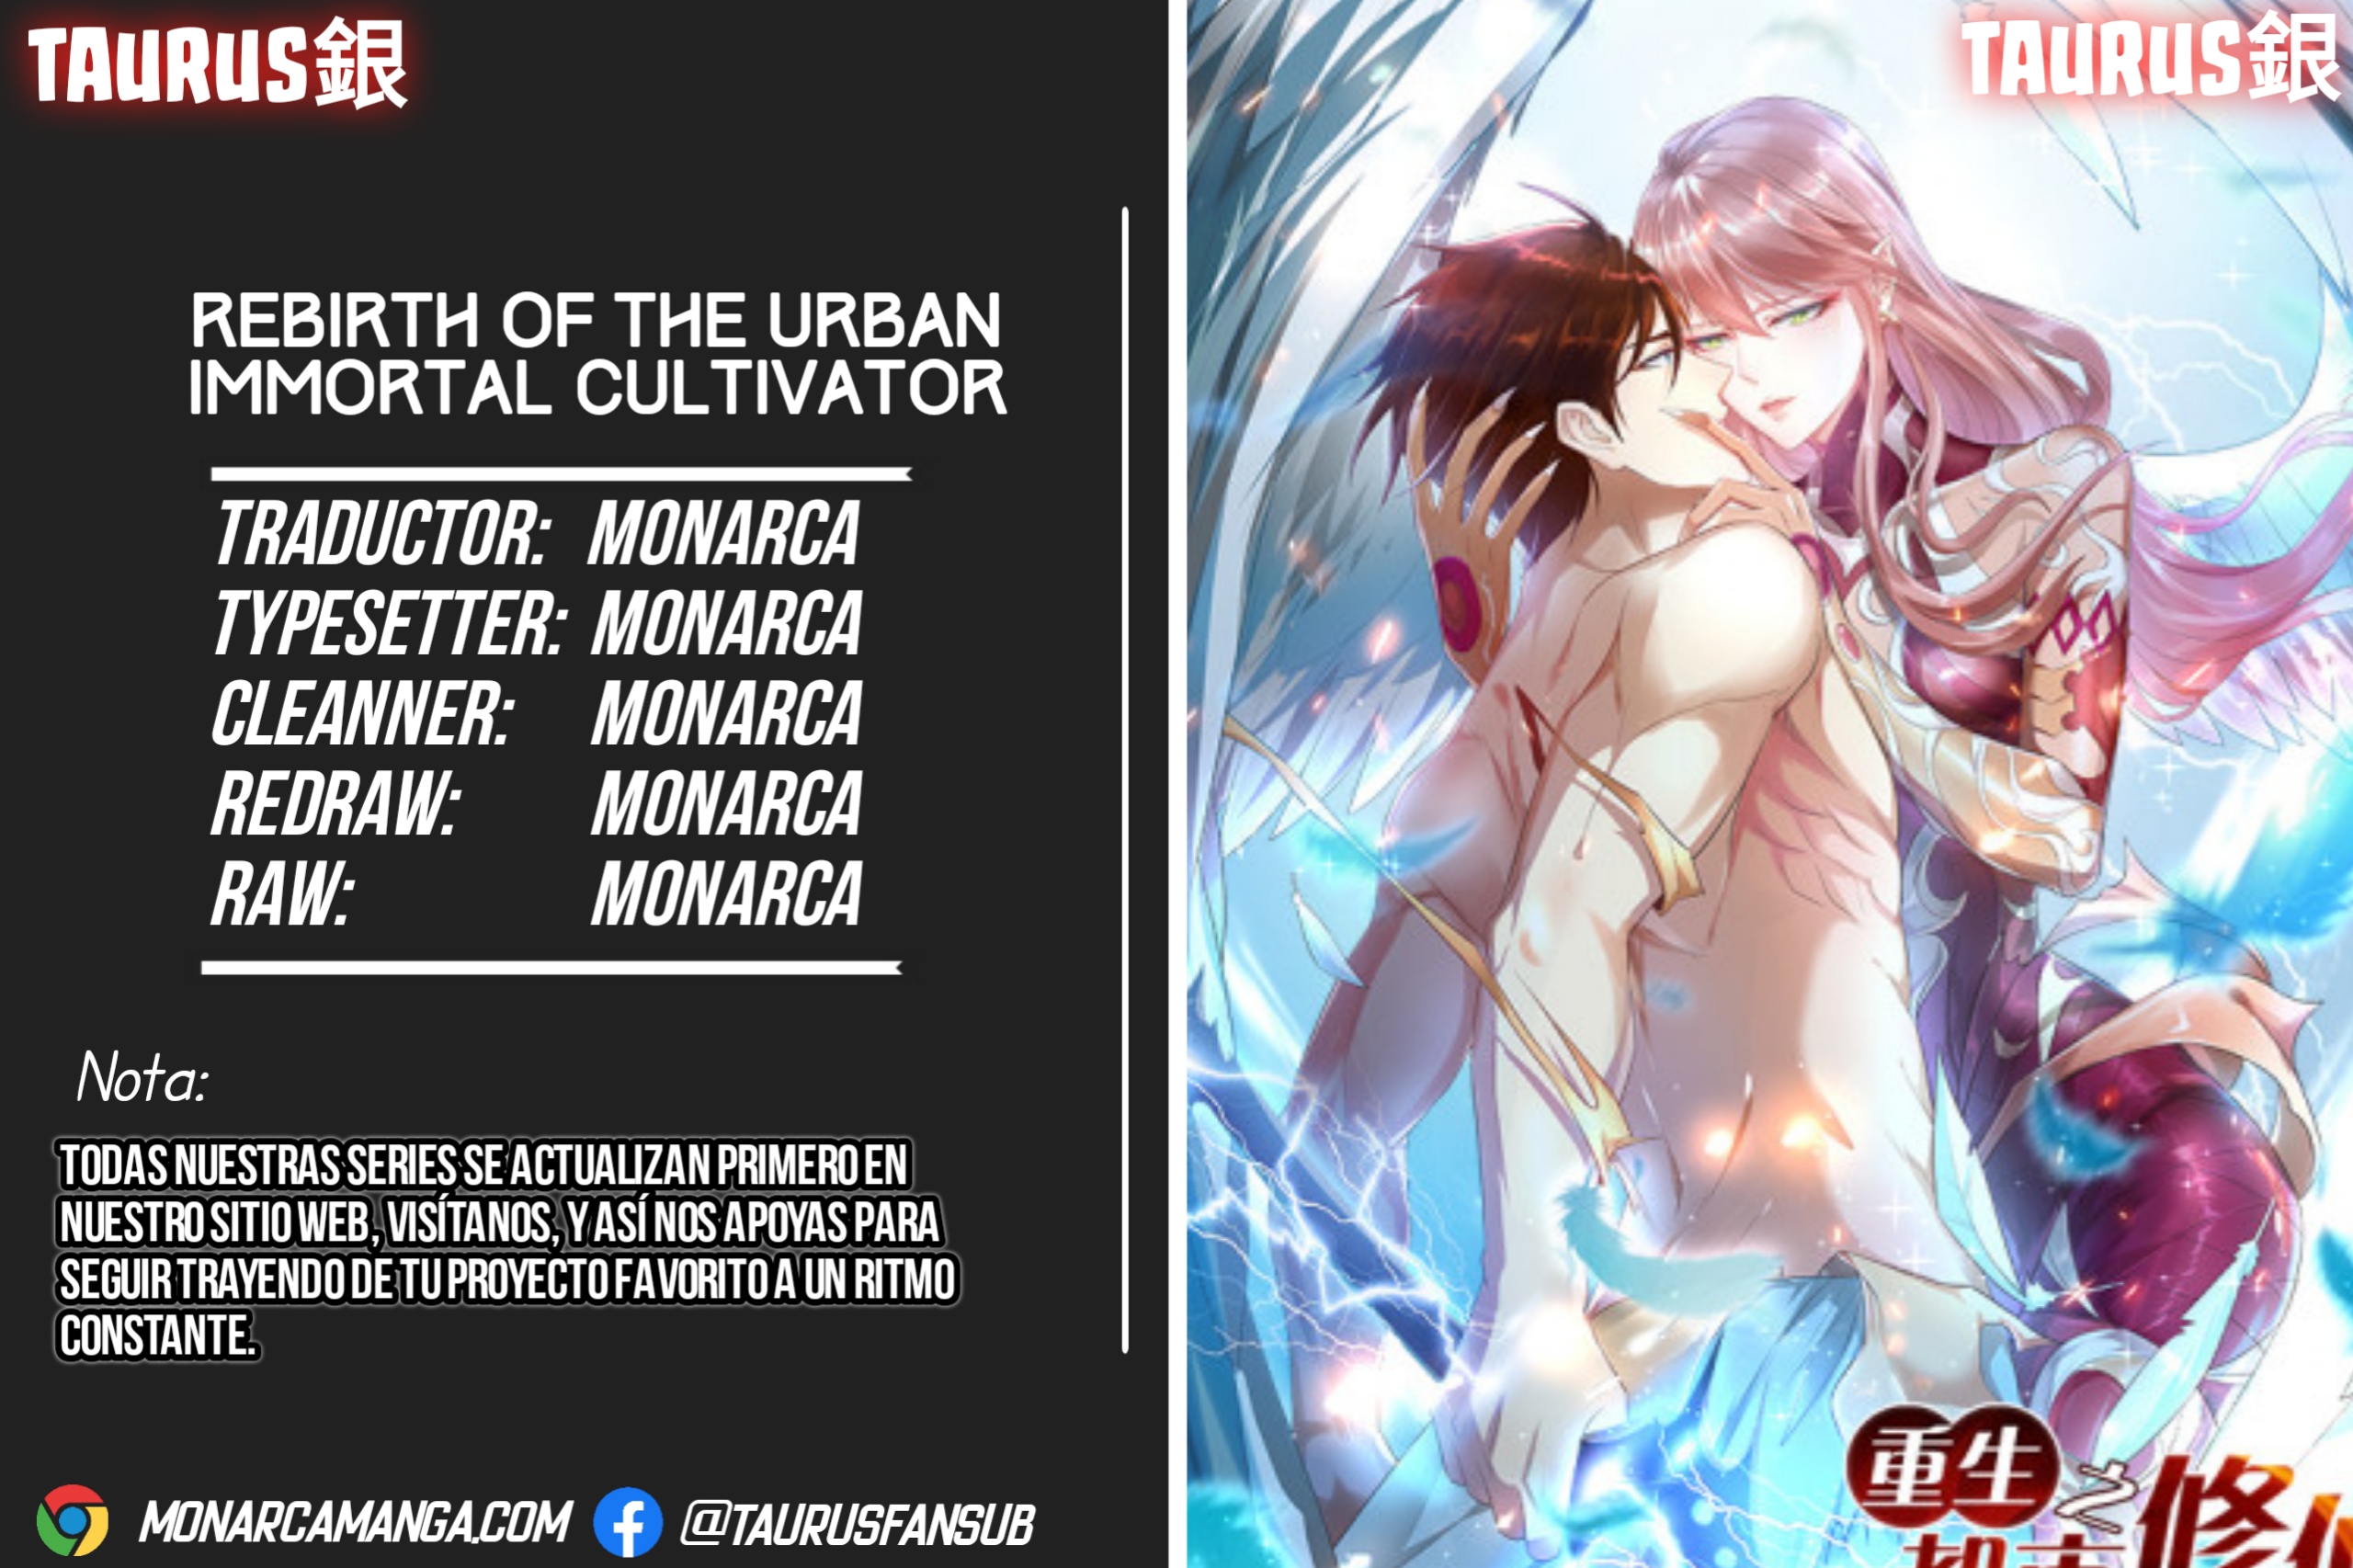 Manga Rebirth Of The Urban Immortal Cultivator Chapter 771 image number 6